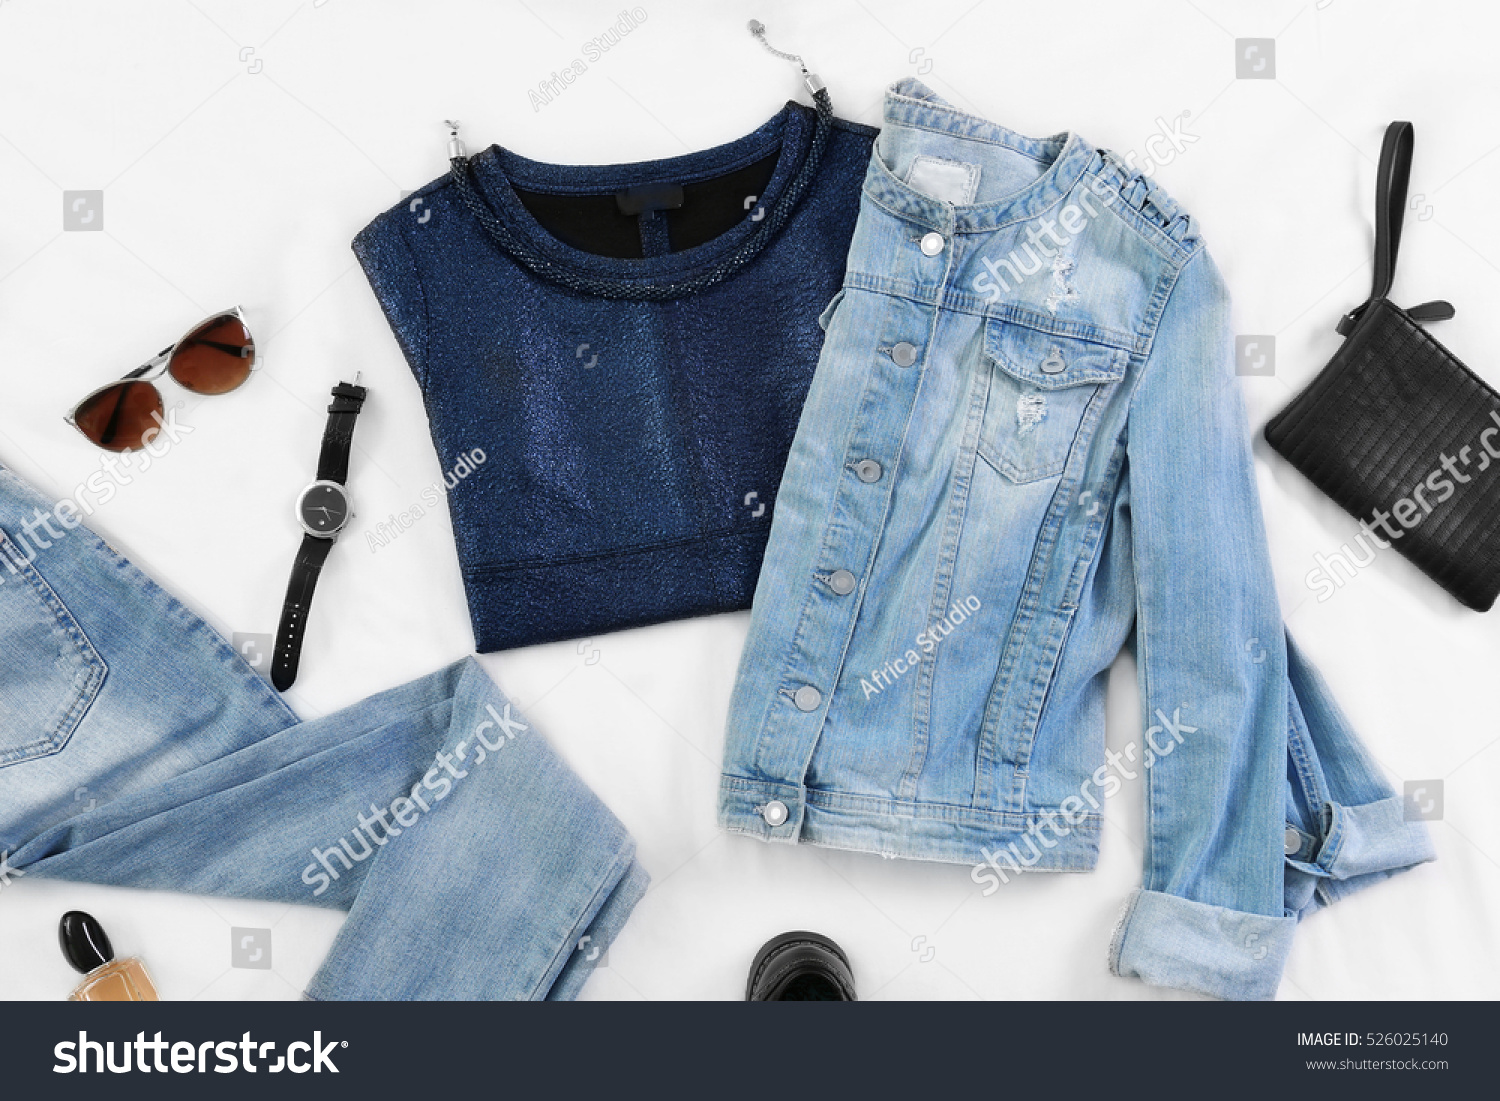 Modern Clothes On Bed Stock Photo 526025140 | Shutterstock